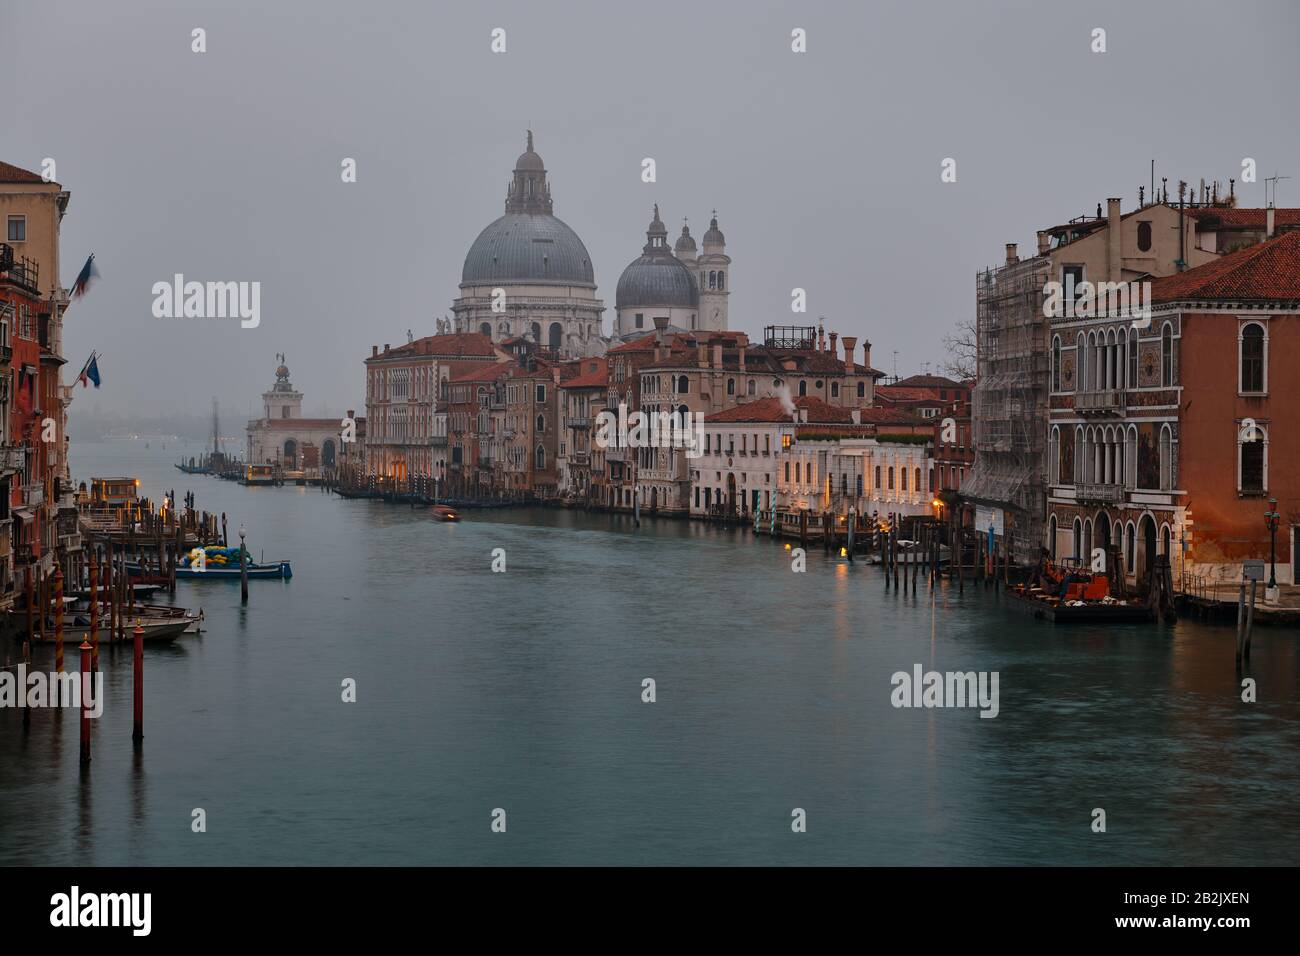 Venice, Italy - February 17 2020 : View of the Grand Canal of Venice Italy and the Basilica Santa Maria della Salute on morning fog Stock Photo